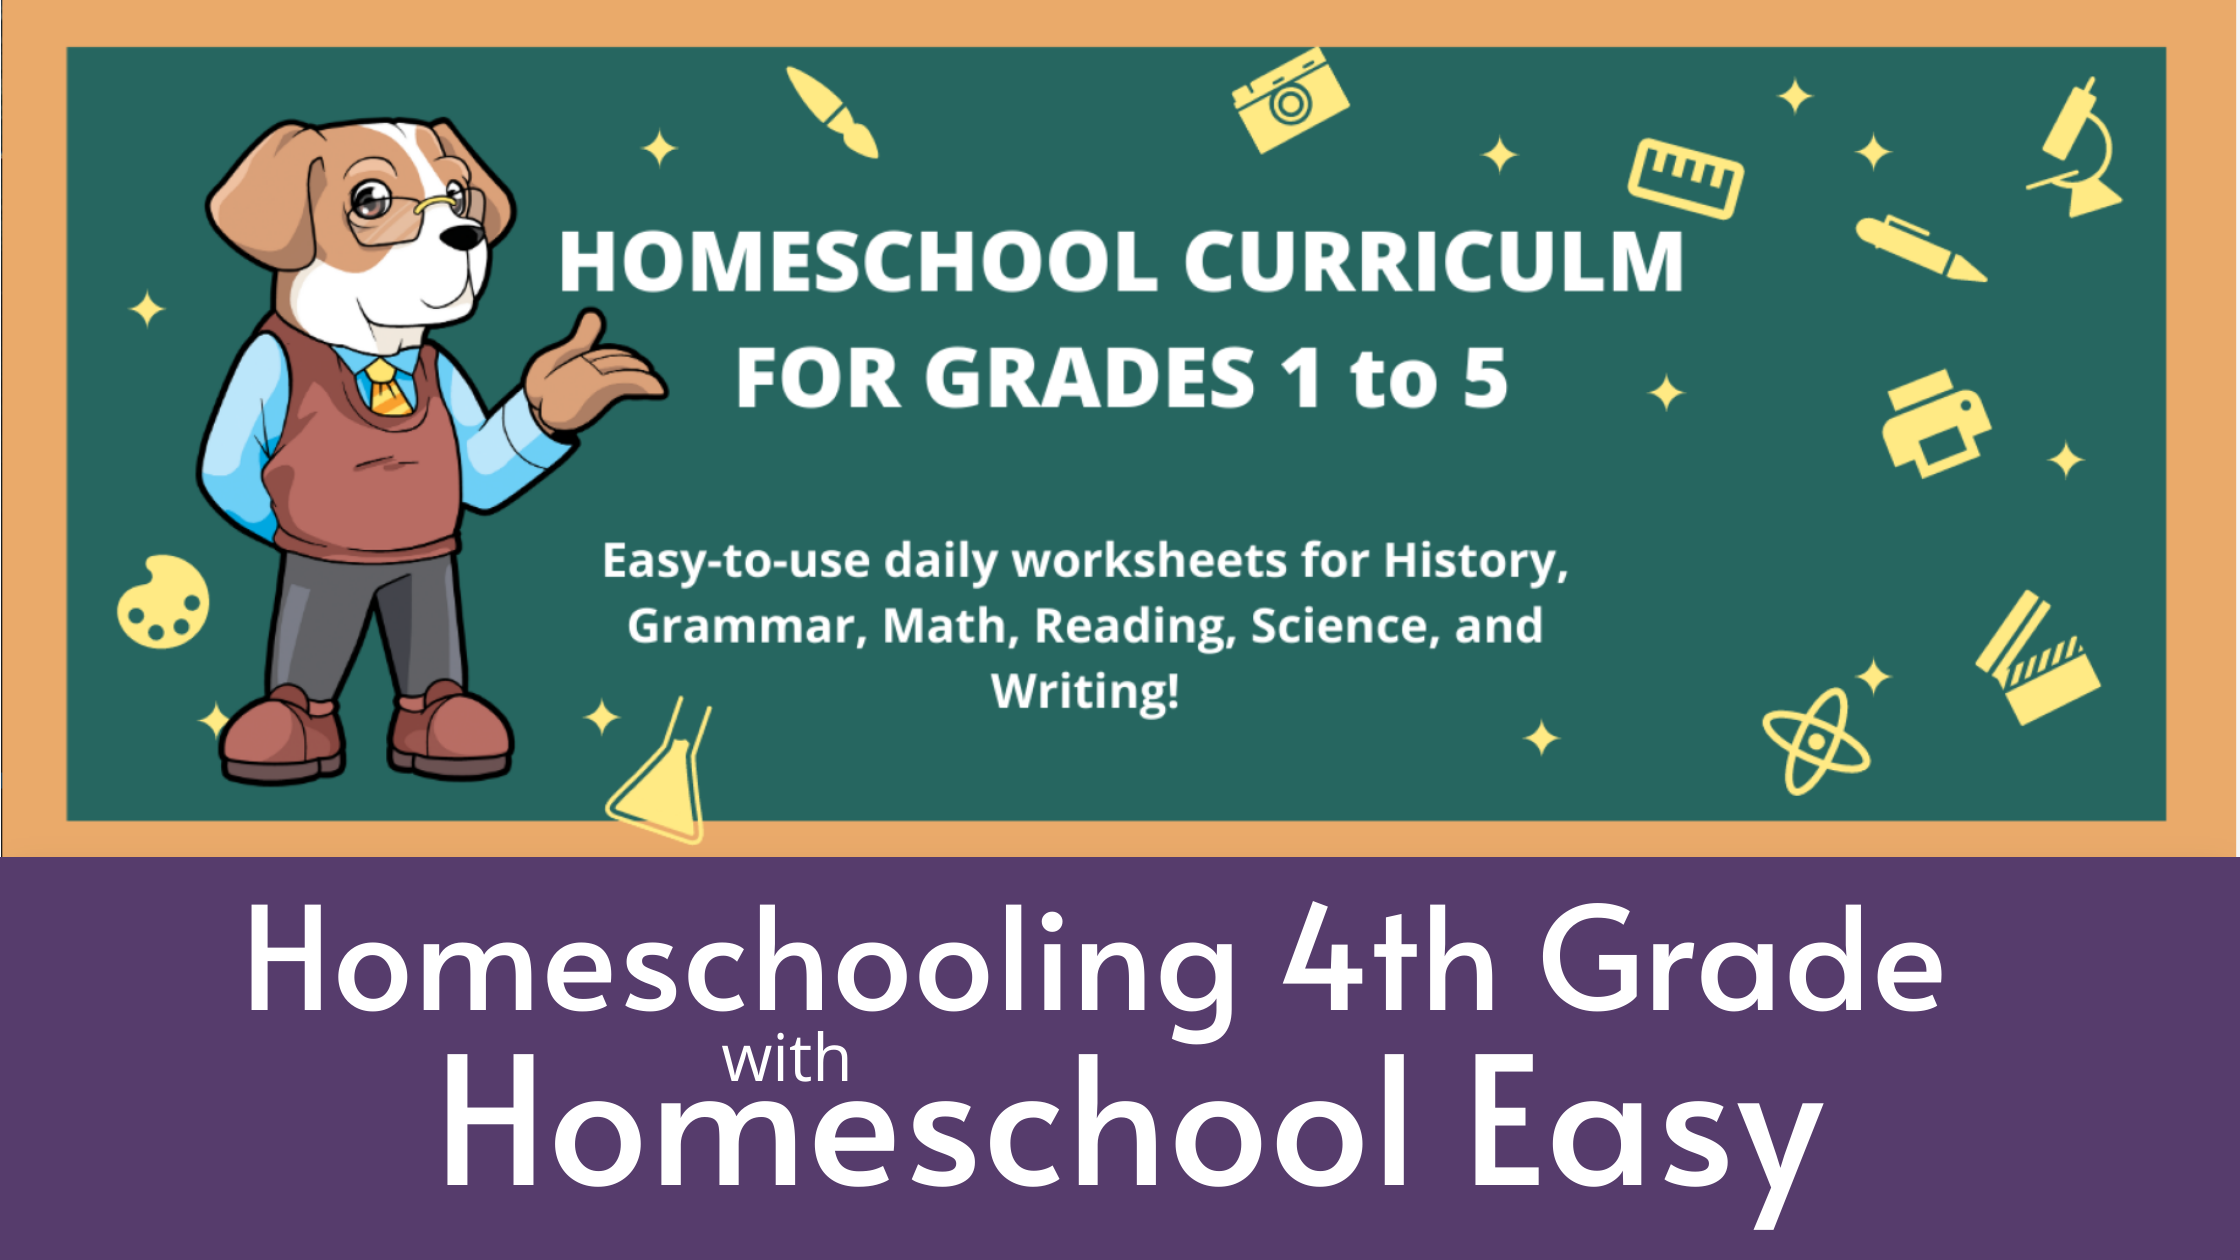 #Freeproductreceived Homeschool Easy provides an all in one Homeschool Curriculum for Elementary students that is ready to go and easy to use! #hsreviews #HomeschoolEasy